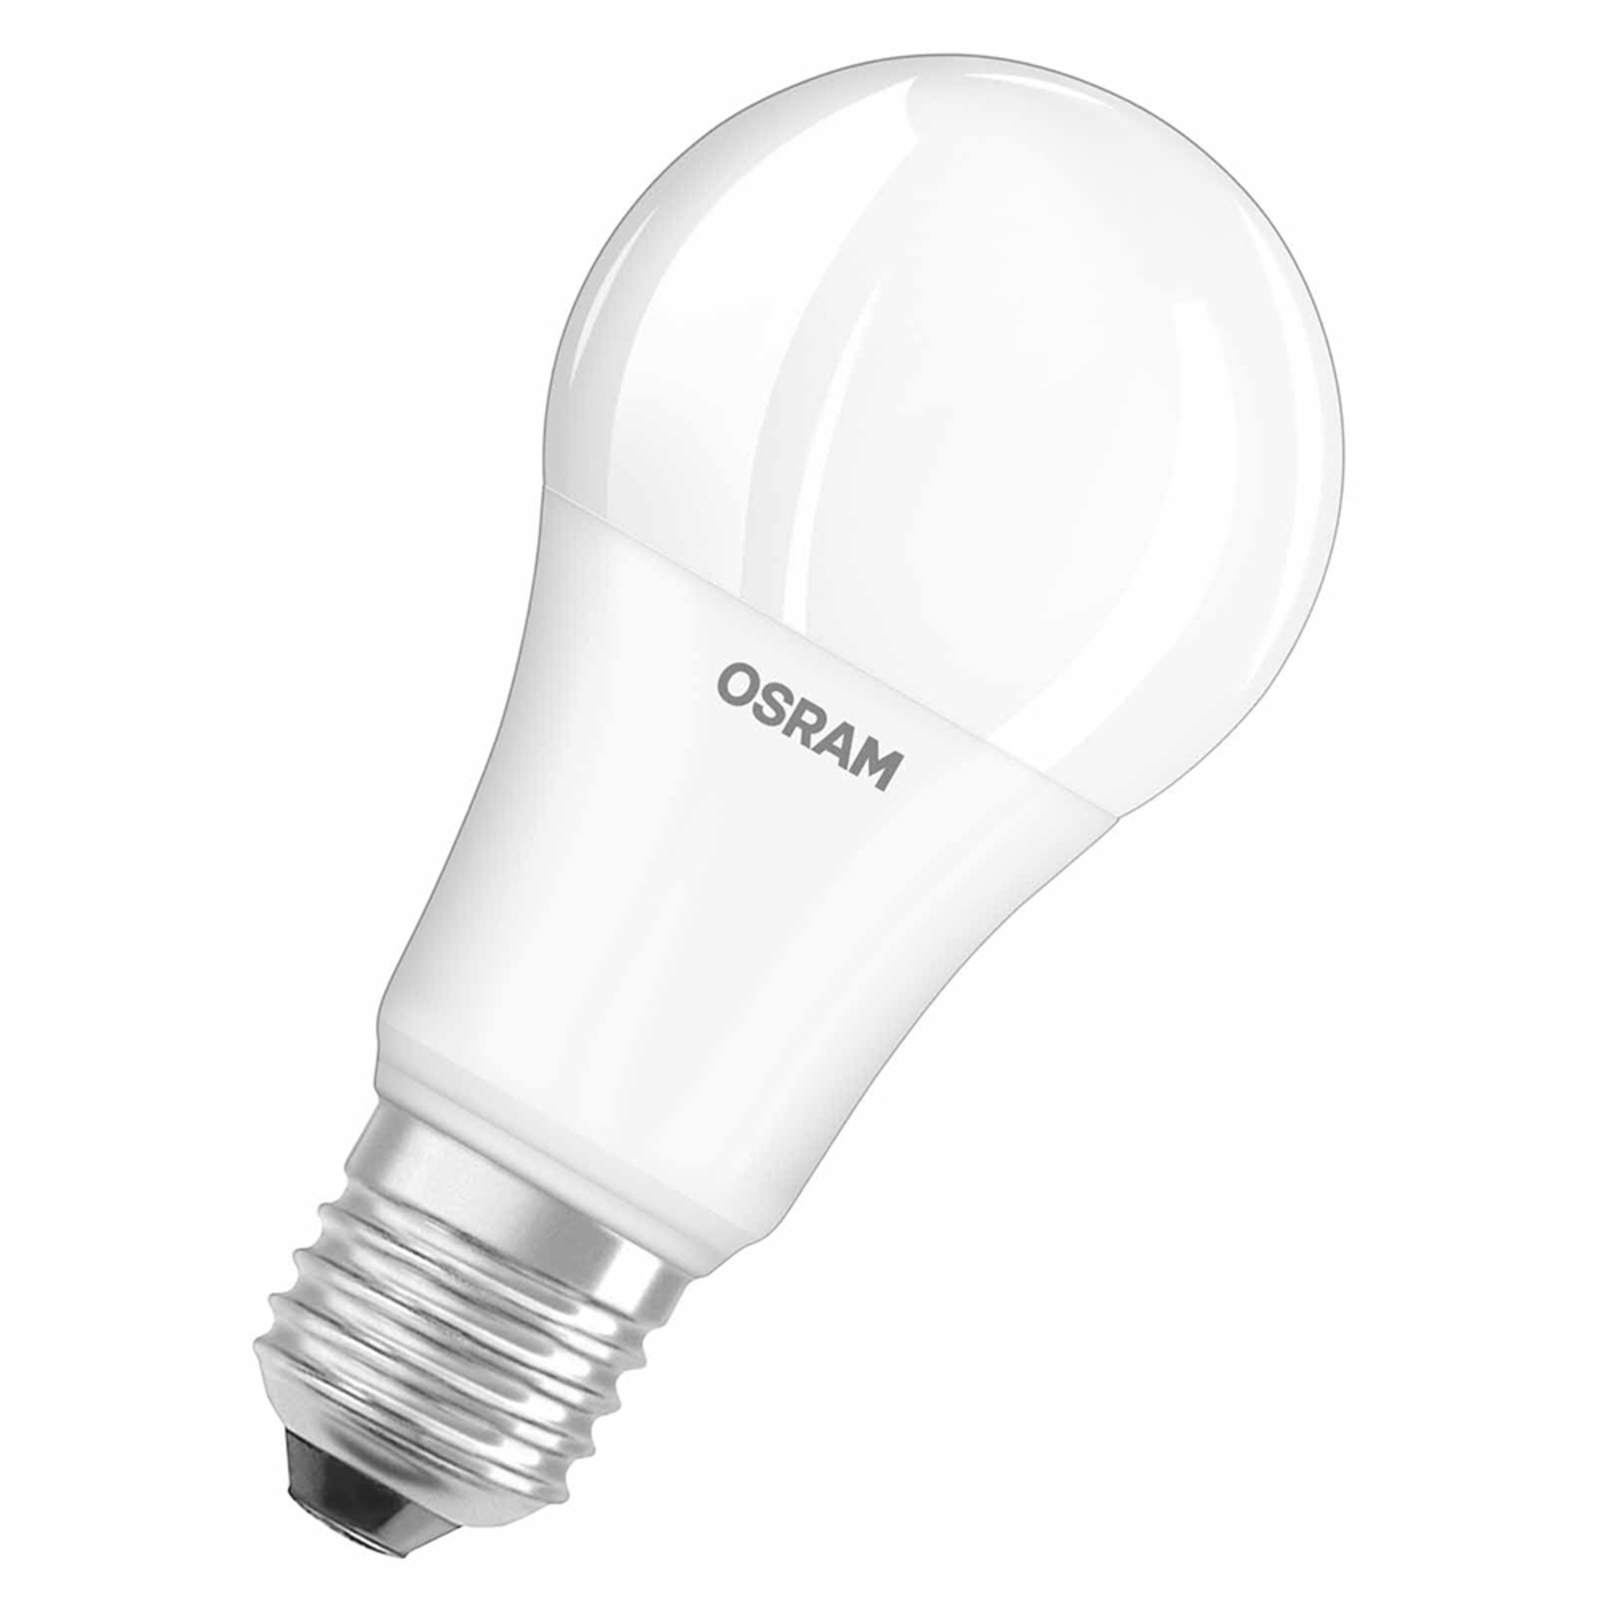 OSRAM ampoule LED E27 14 W 827 Superstar, dimmable